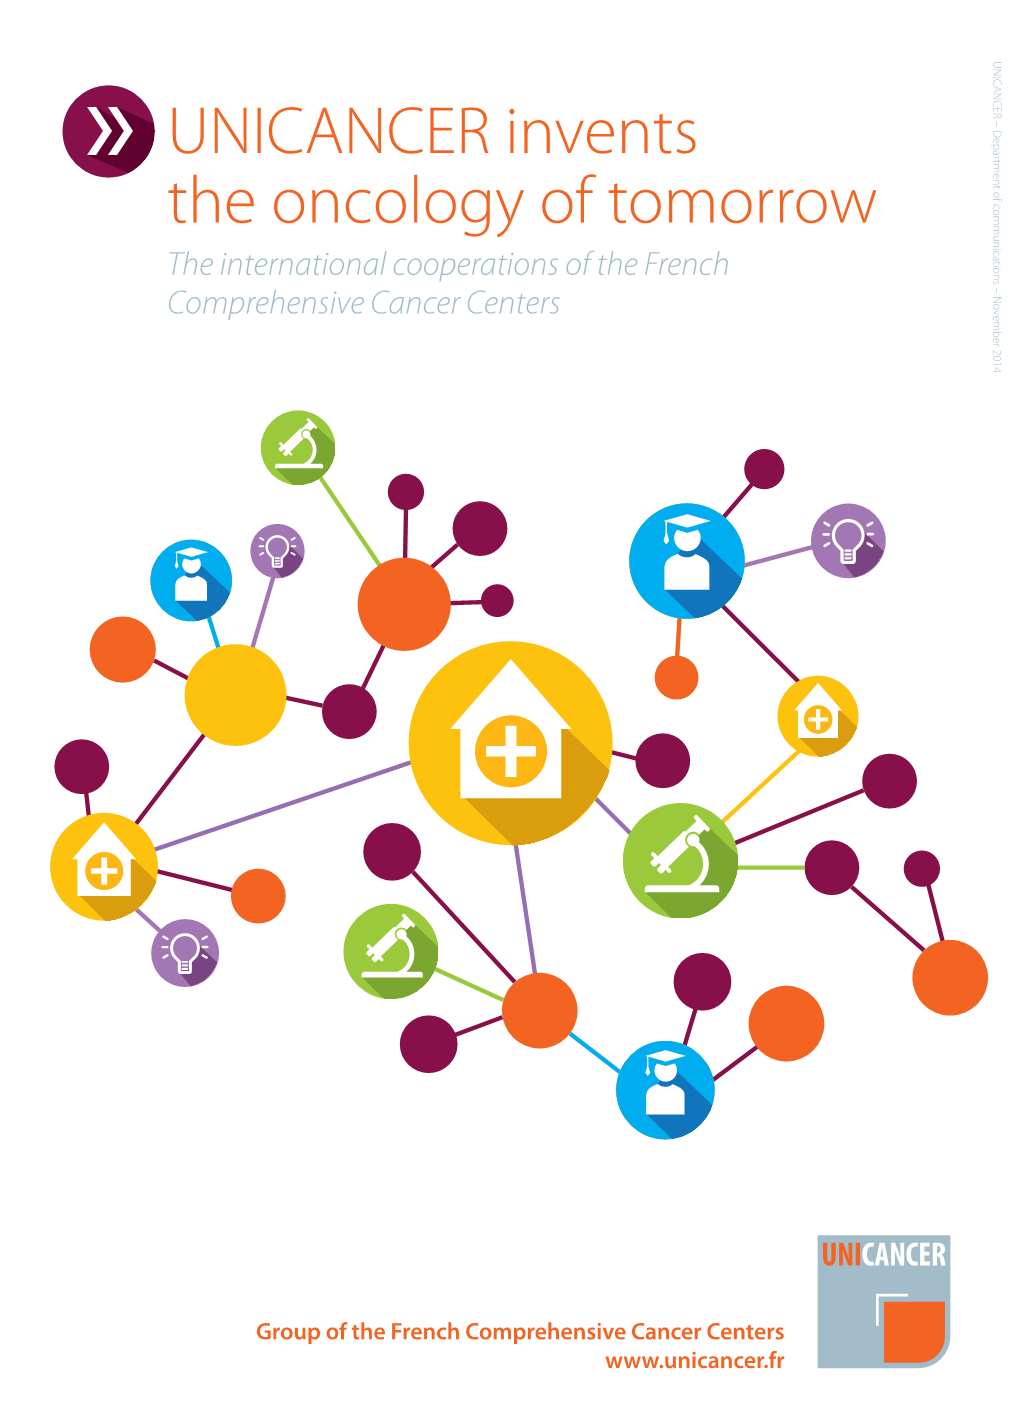 UNICANCER Invents the Oncology of Tomorrow the International Cooperations of the French Comprehensive Cancer Centers